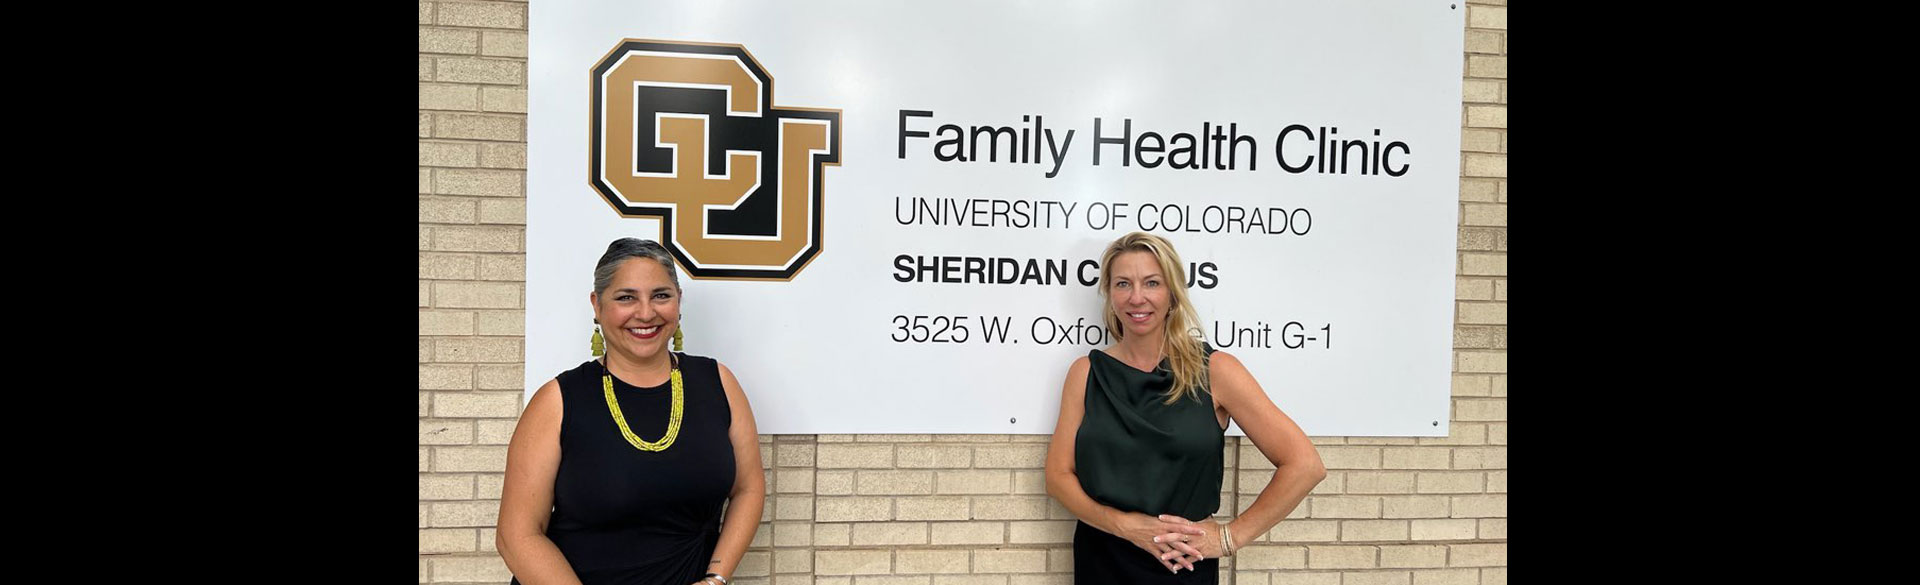 HHS Region 8 Lily Griego and Sheridan Health Services CEO Erica Sherer